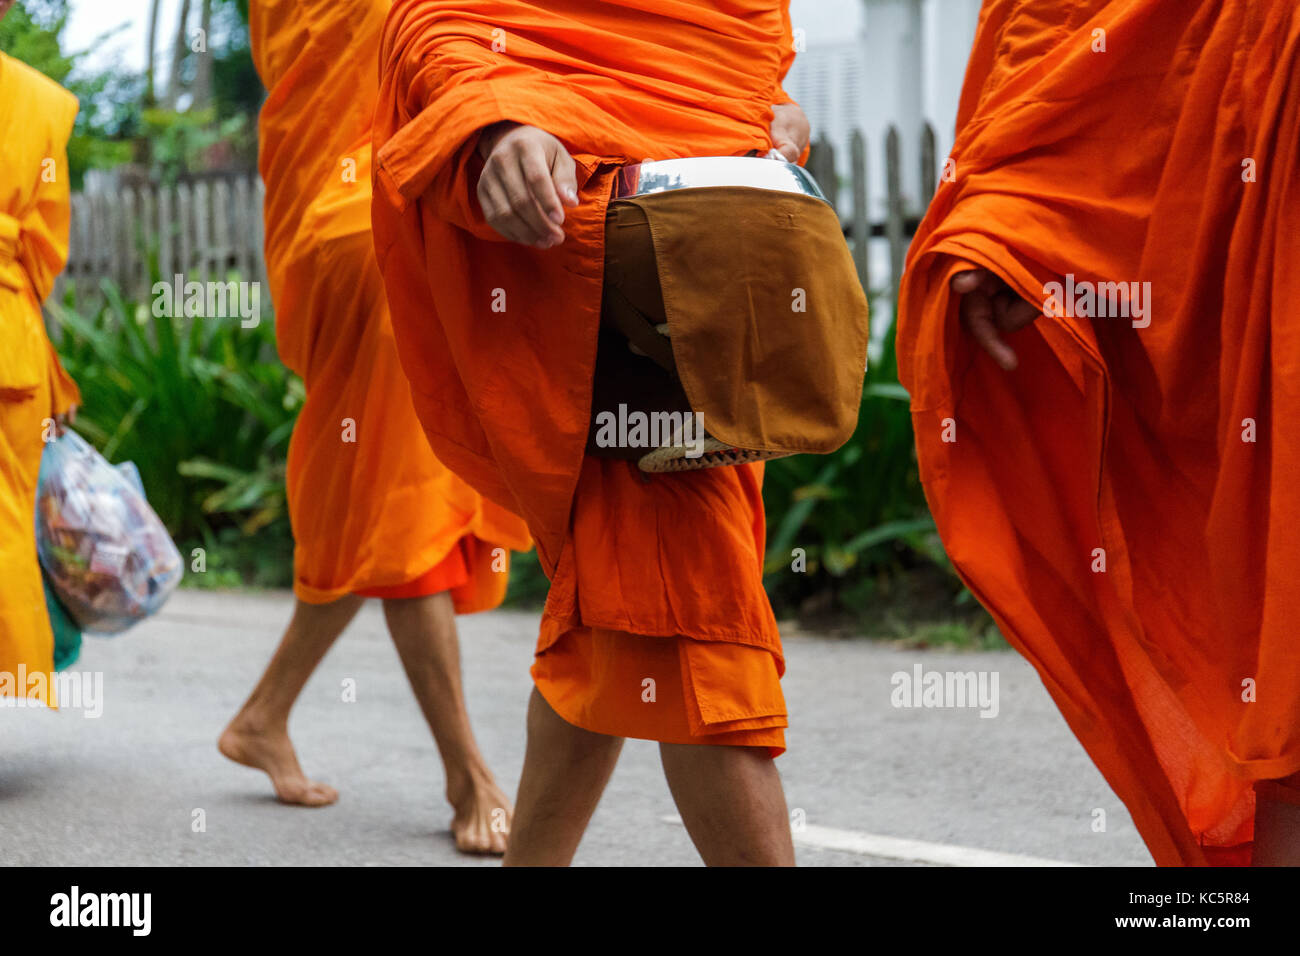 Buddhist monks collect alms in Luang Prabang, Laos Stock Photo